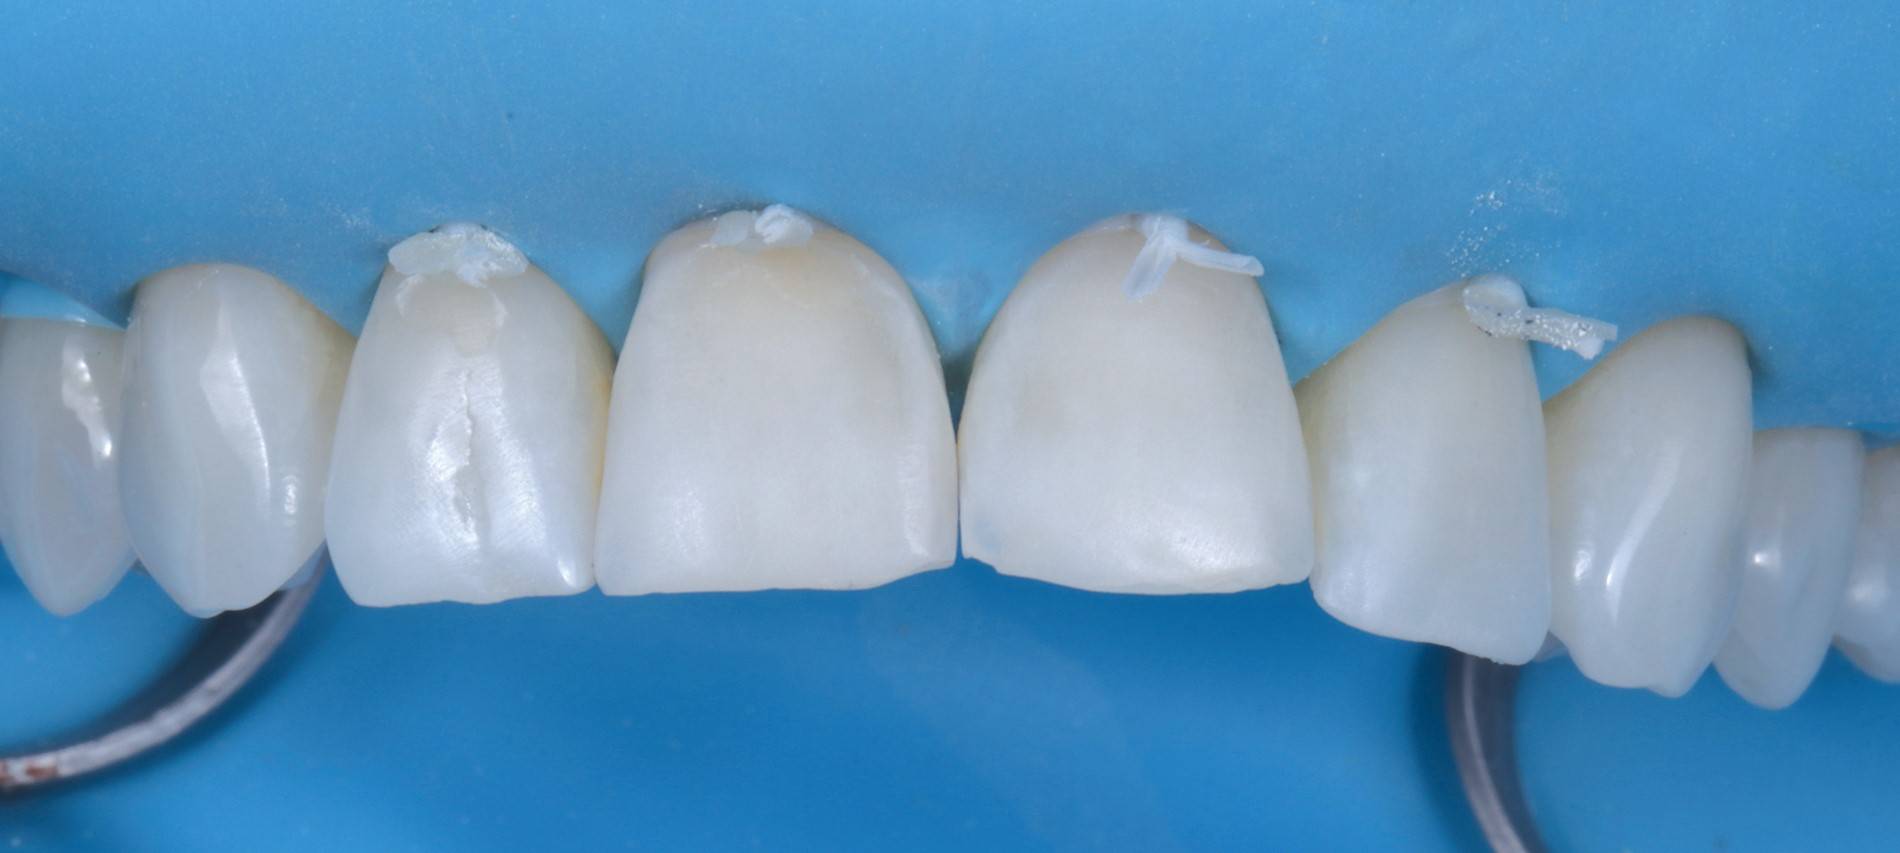 Patients upper teeth isolated by blue rubber dam